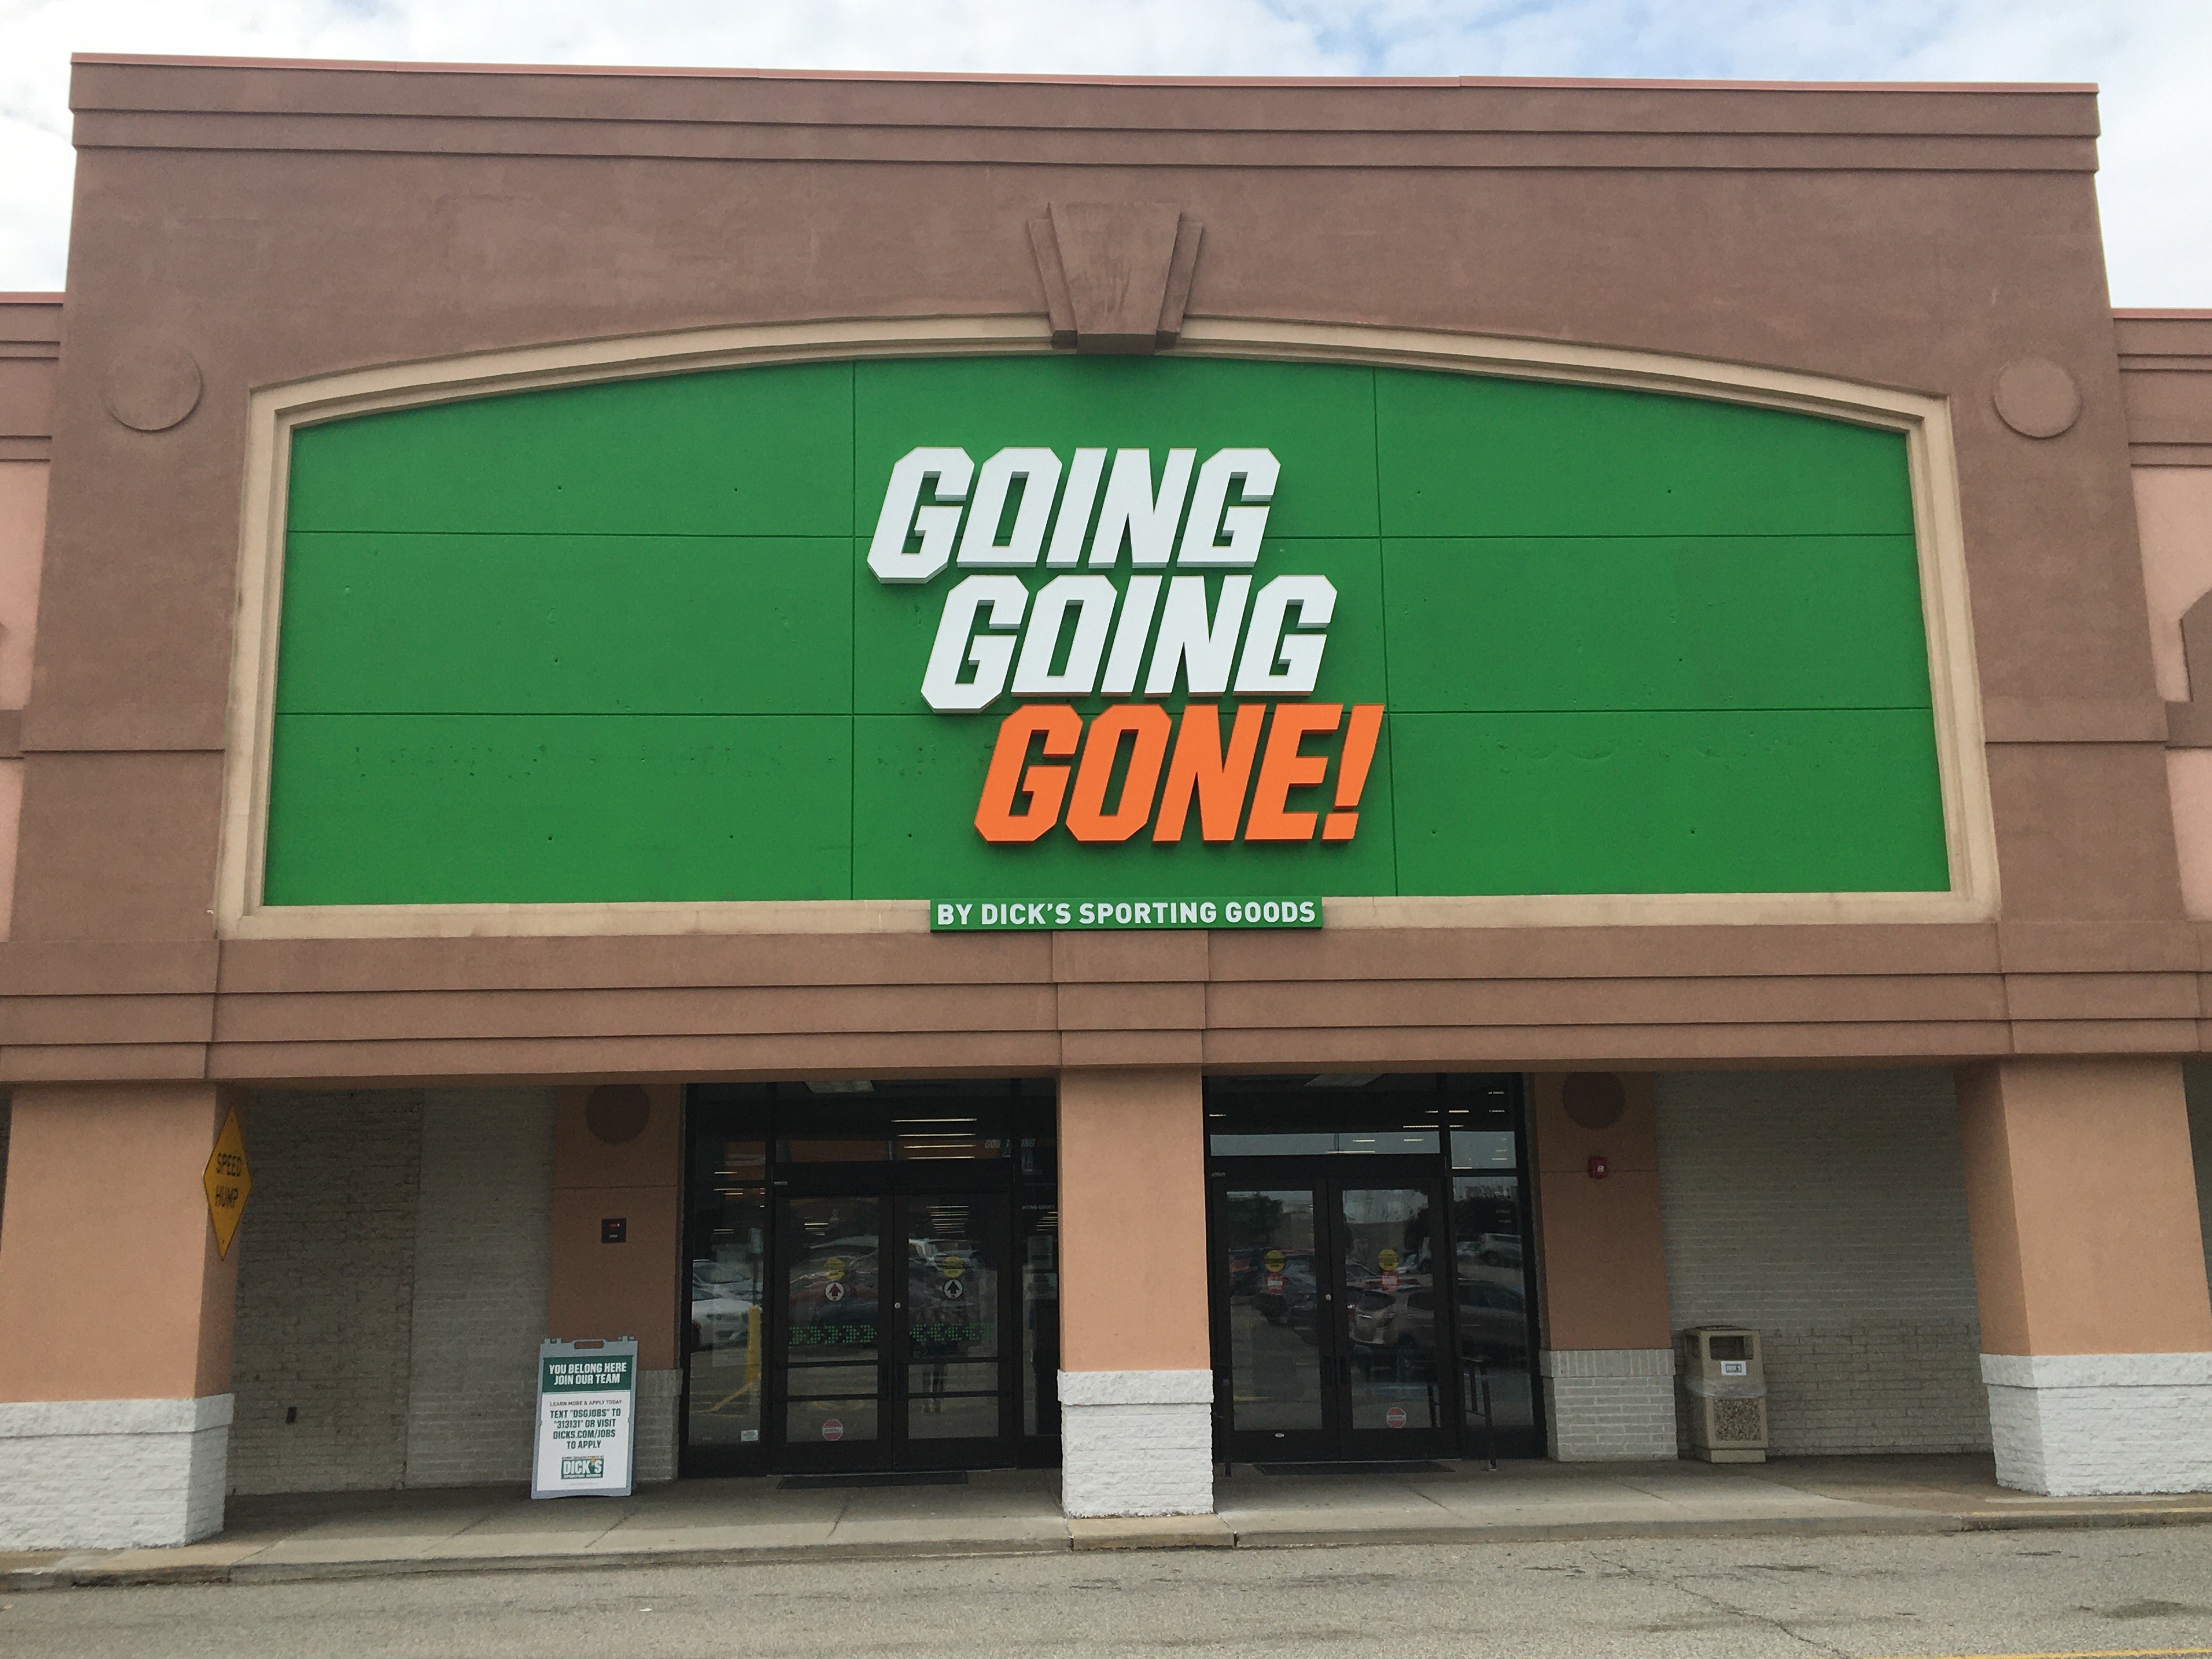 GOING, GOING, GONE! at monroeville mall annex